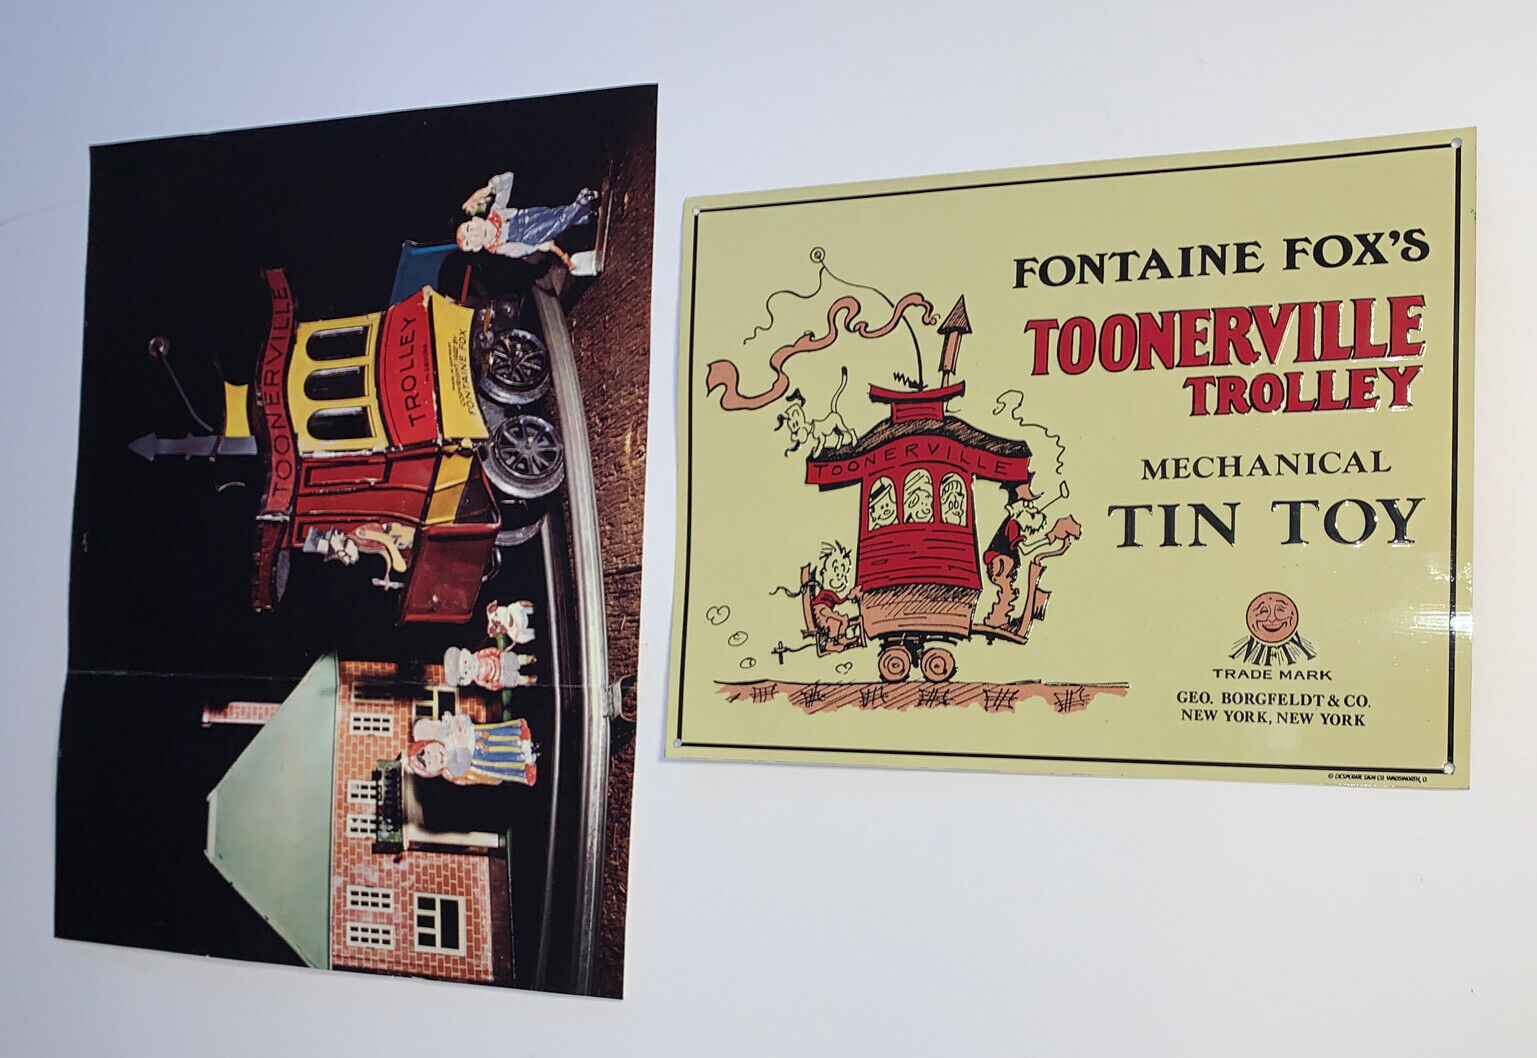 1922 Fontaine Fox’s Toonerville Trolley Mechanical Tin Toy Metal Sign & Poster